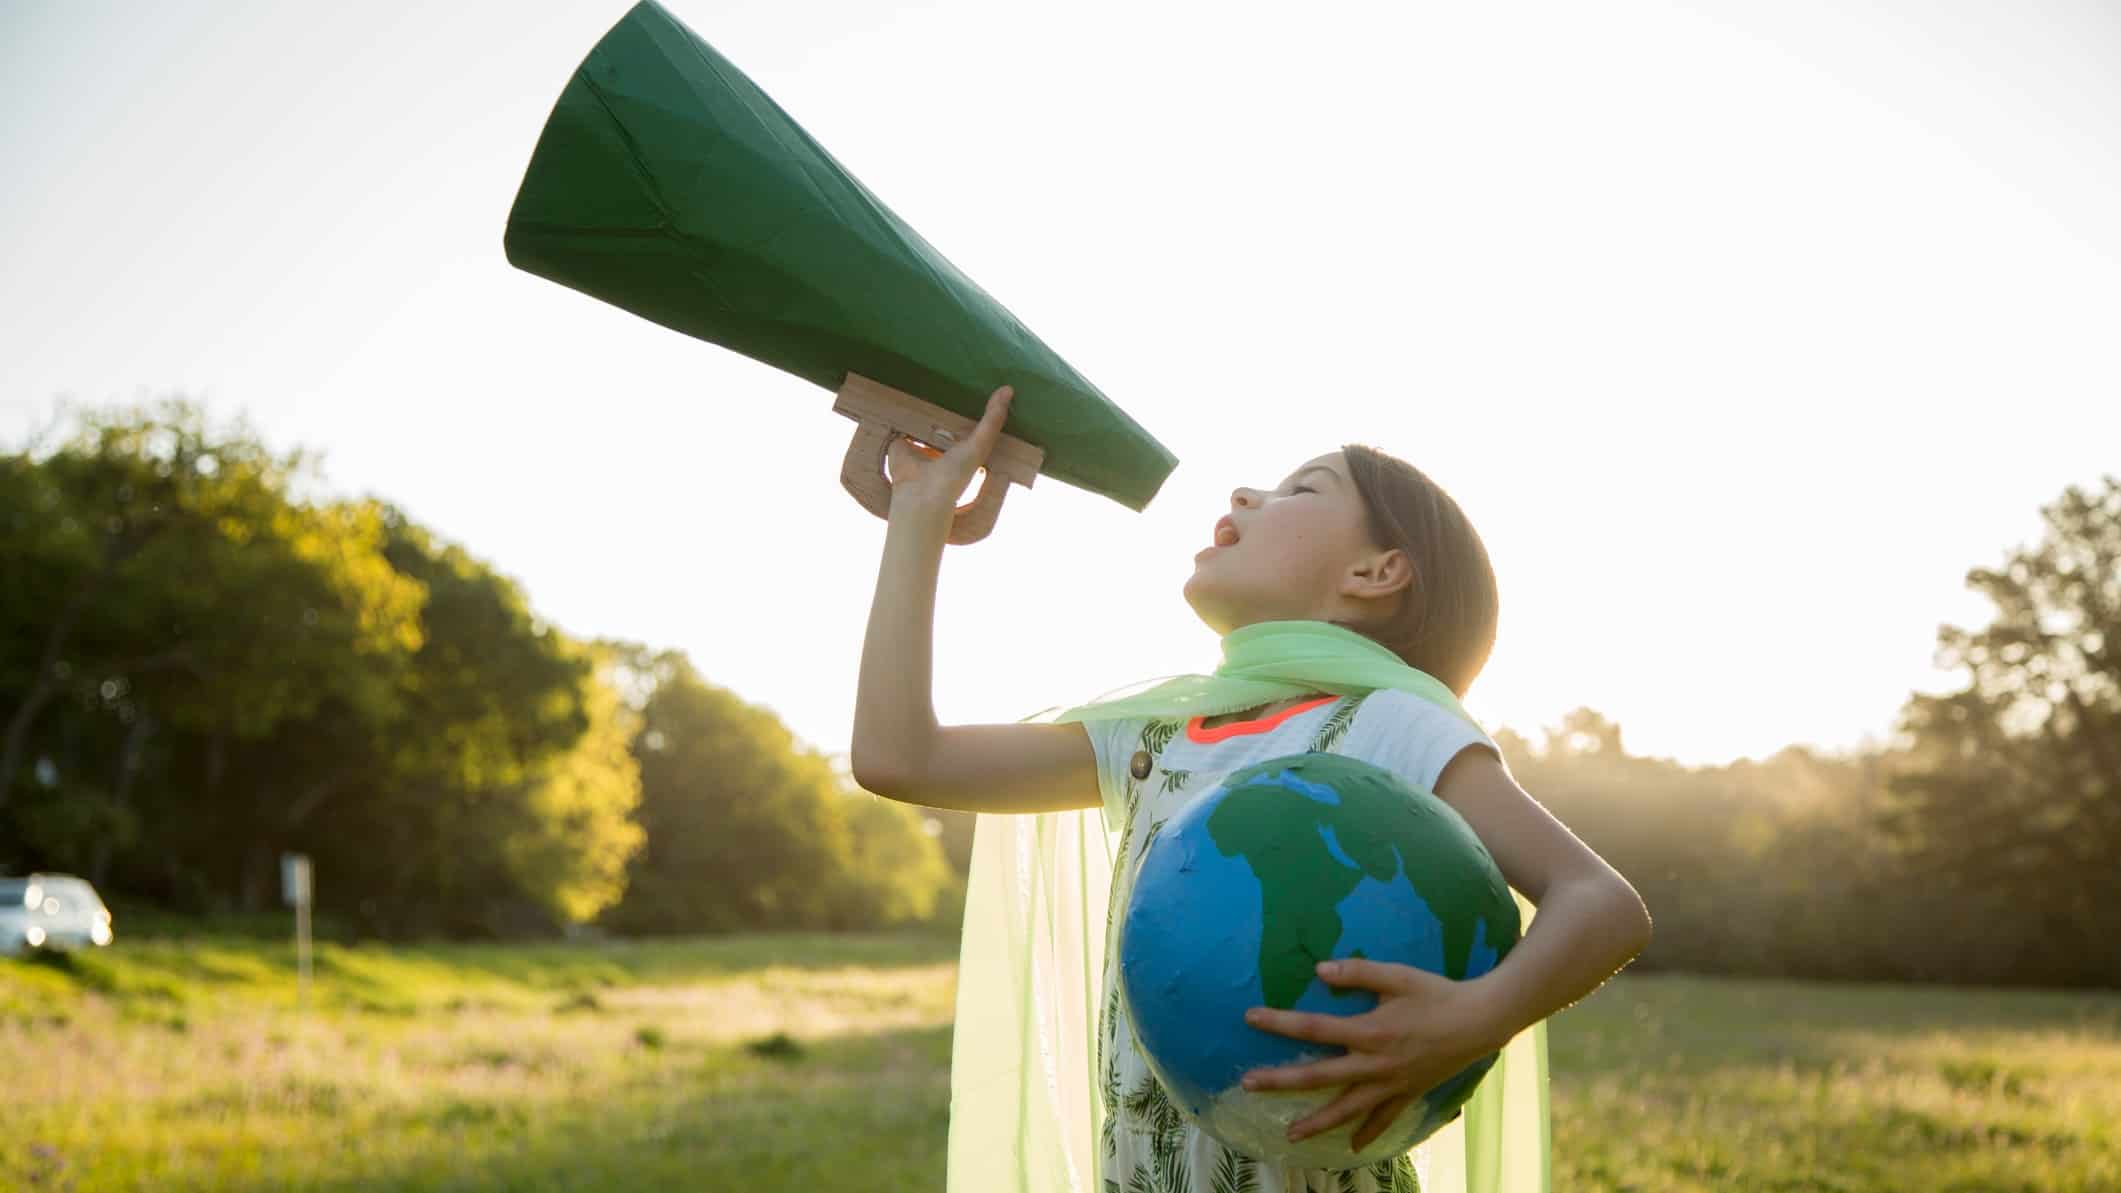 A girl holding a globe shouts into a green megaphone about climate change.